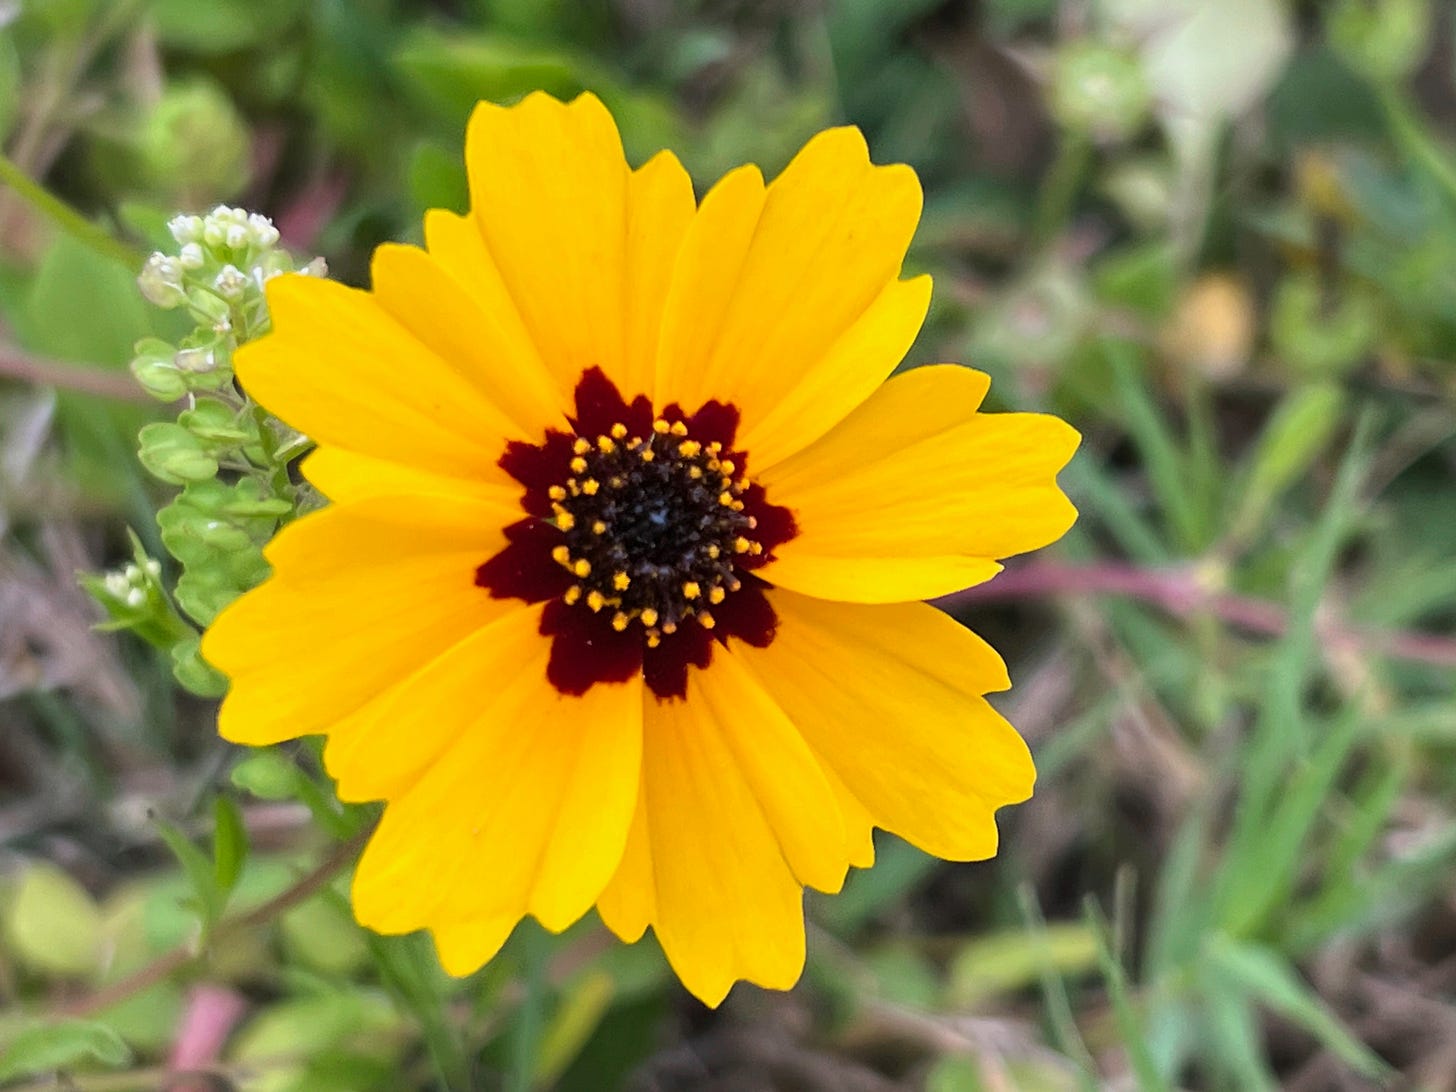 A single yellow flower with a brown center and golden stamens